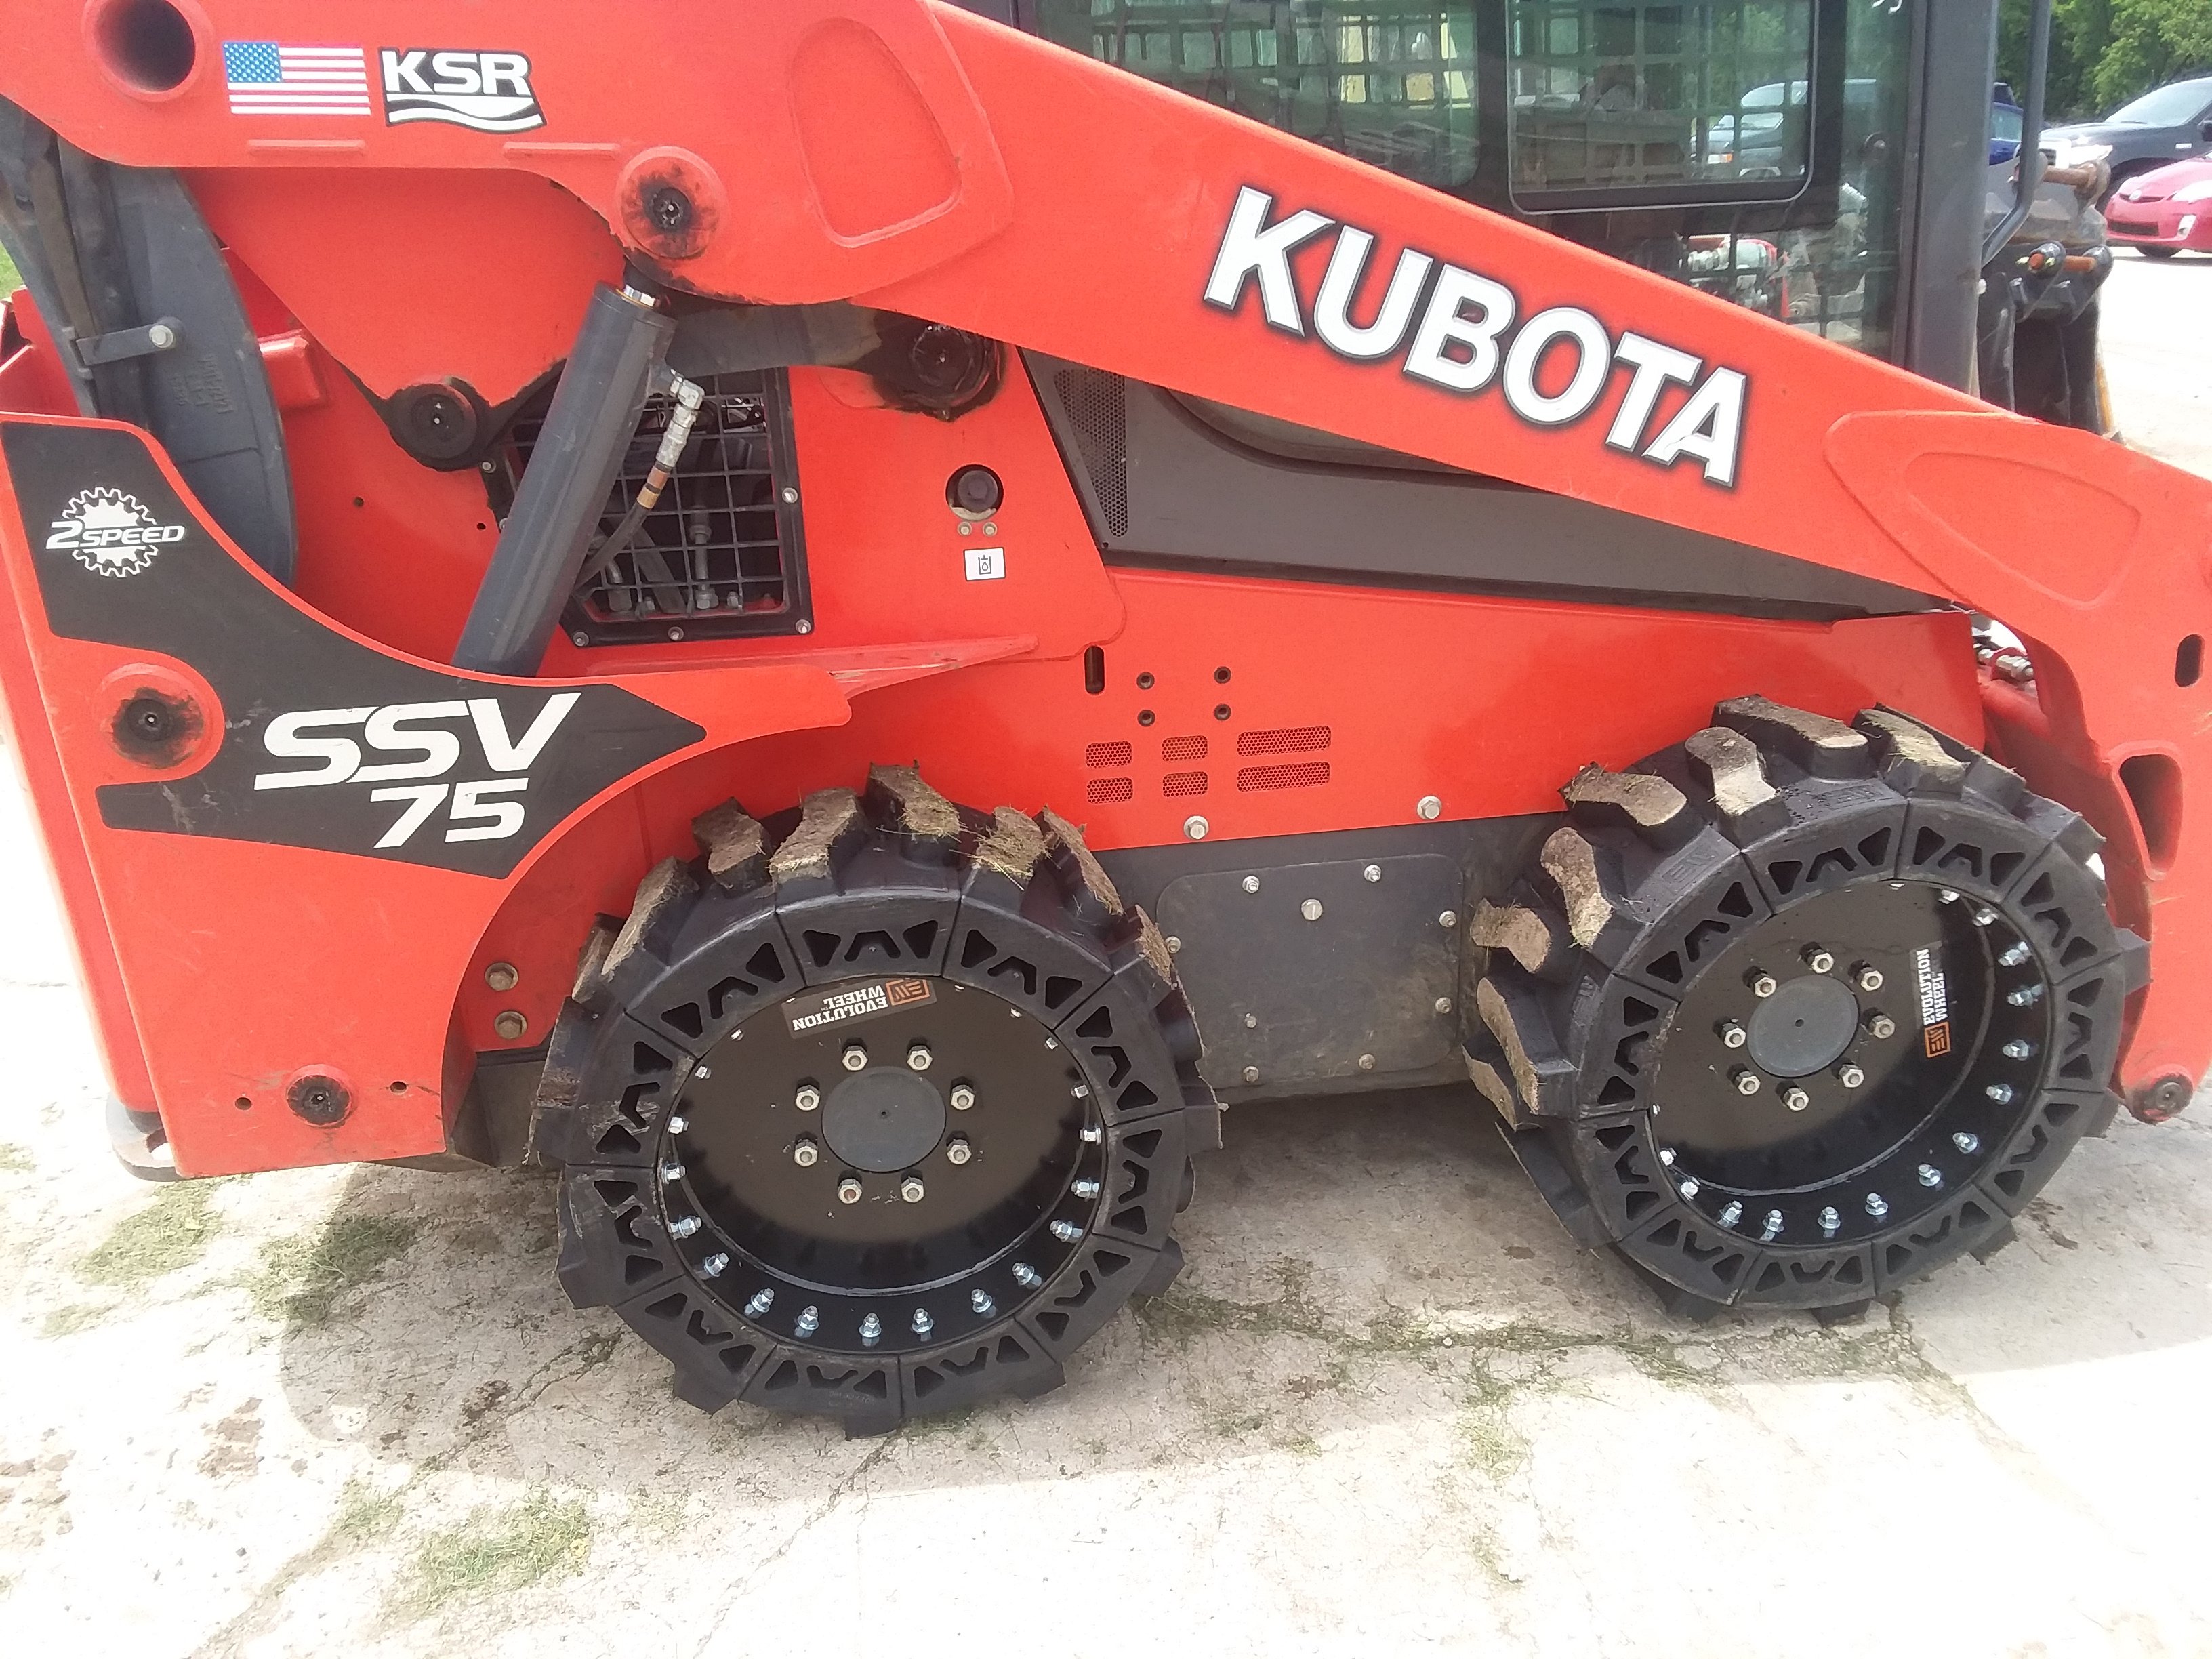 This images shows a red Kubota skid steer using our all terrain solid skid steer tires.